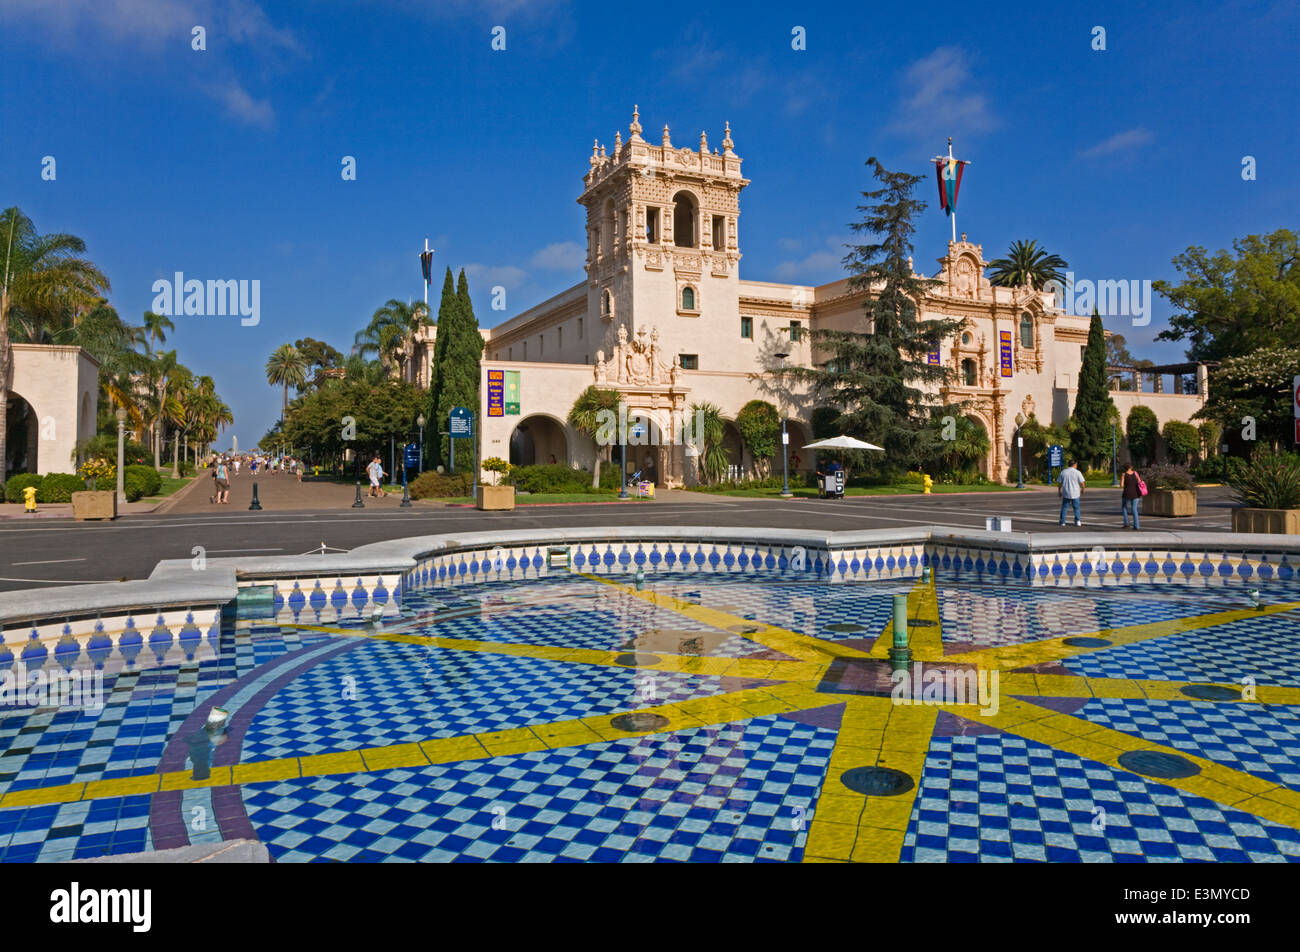 A WATER FOUNTAIN and the HOUSE OF HOSPITALITY located in BALBOA PARK - SAN DIEGO, CALIFORNIA Stock Photo